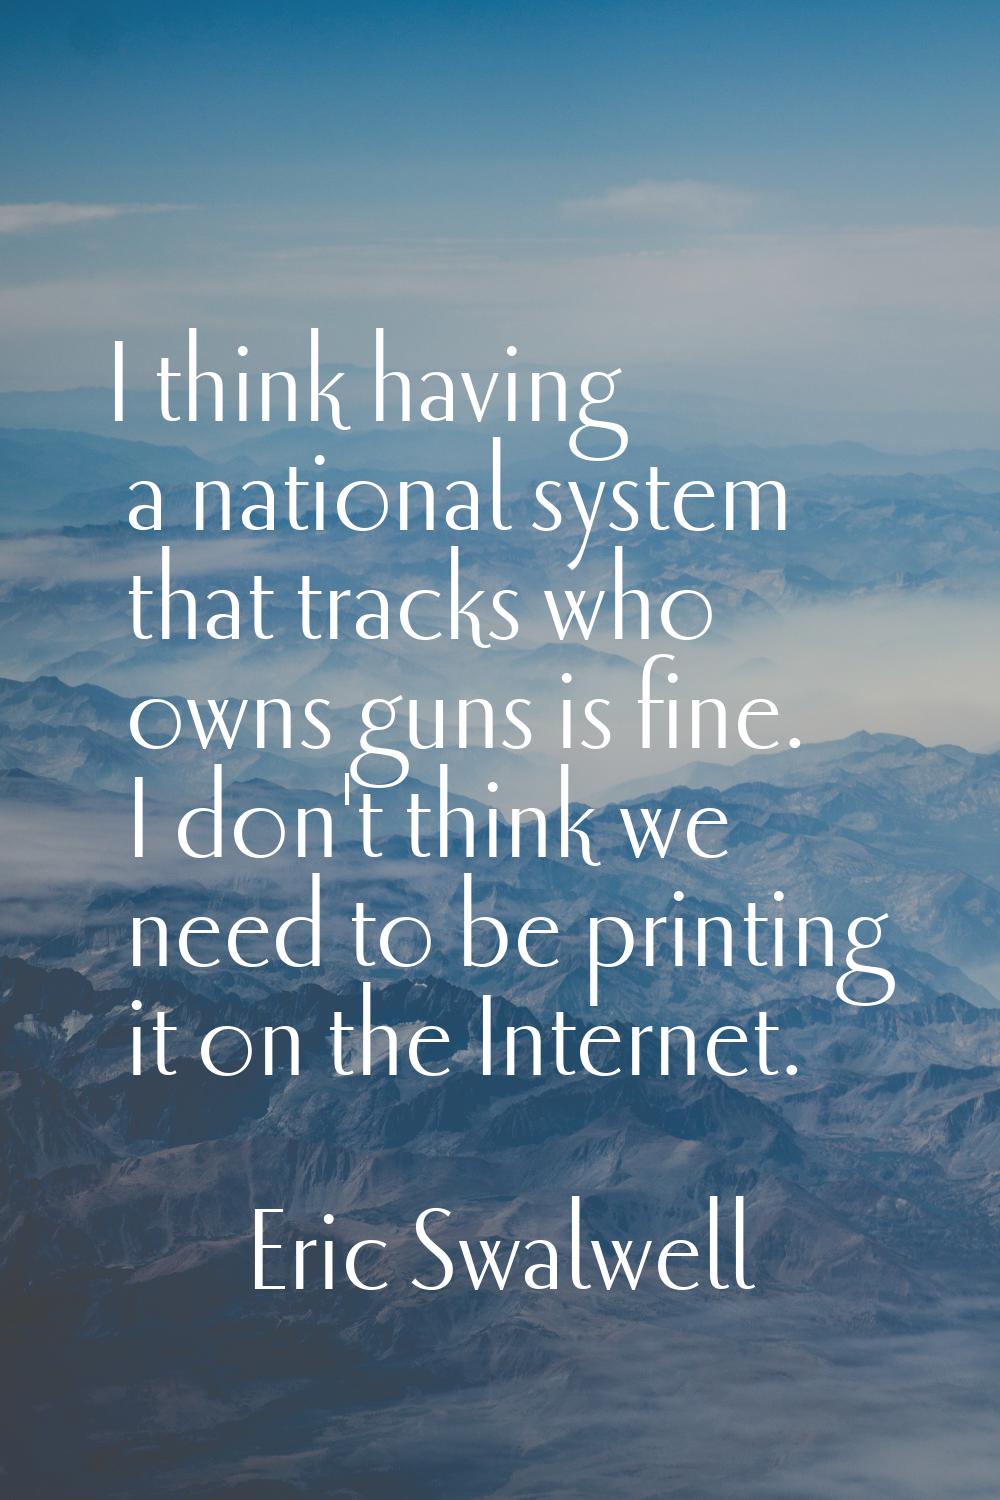 I think having a national system that tracks who owns guns is fine. I don't think we need to be pri